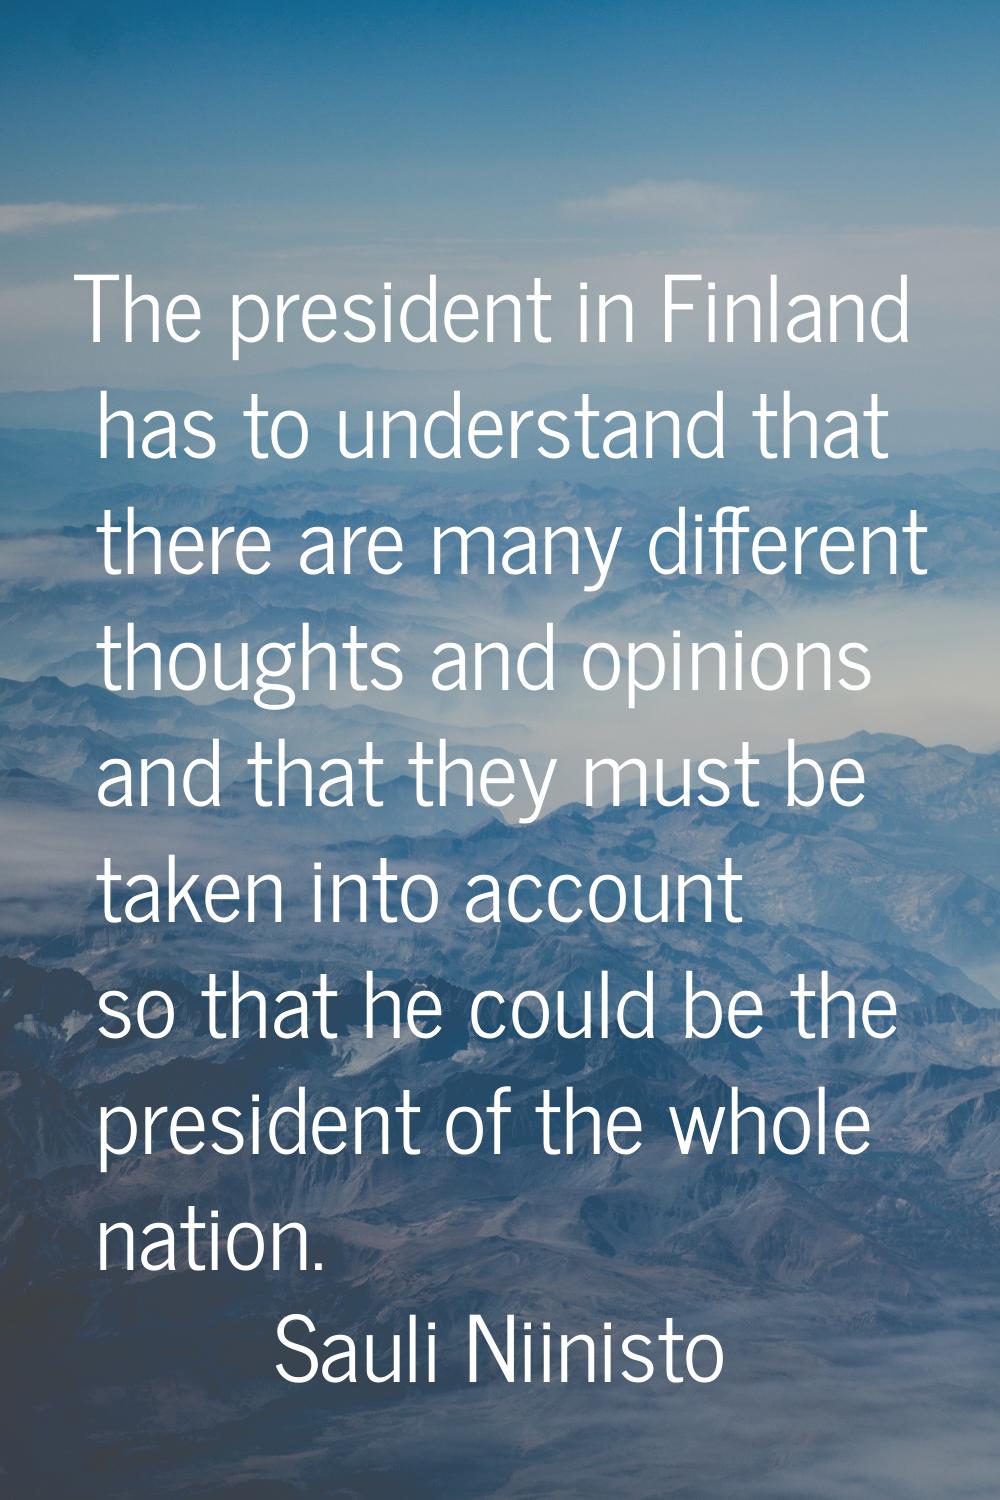 The president in Finland has to understand that there are many different thoughts and opinions and 